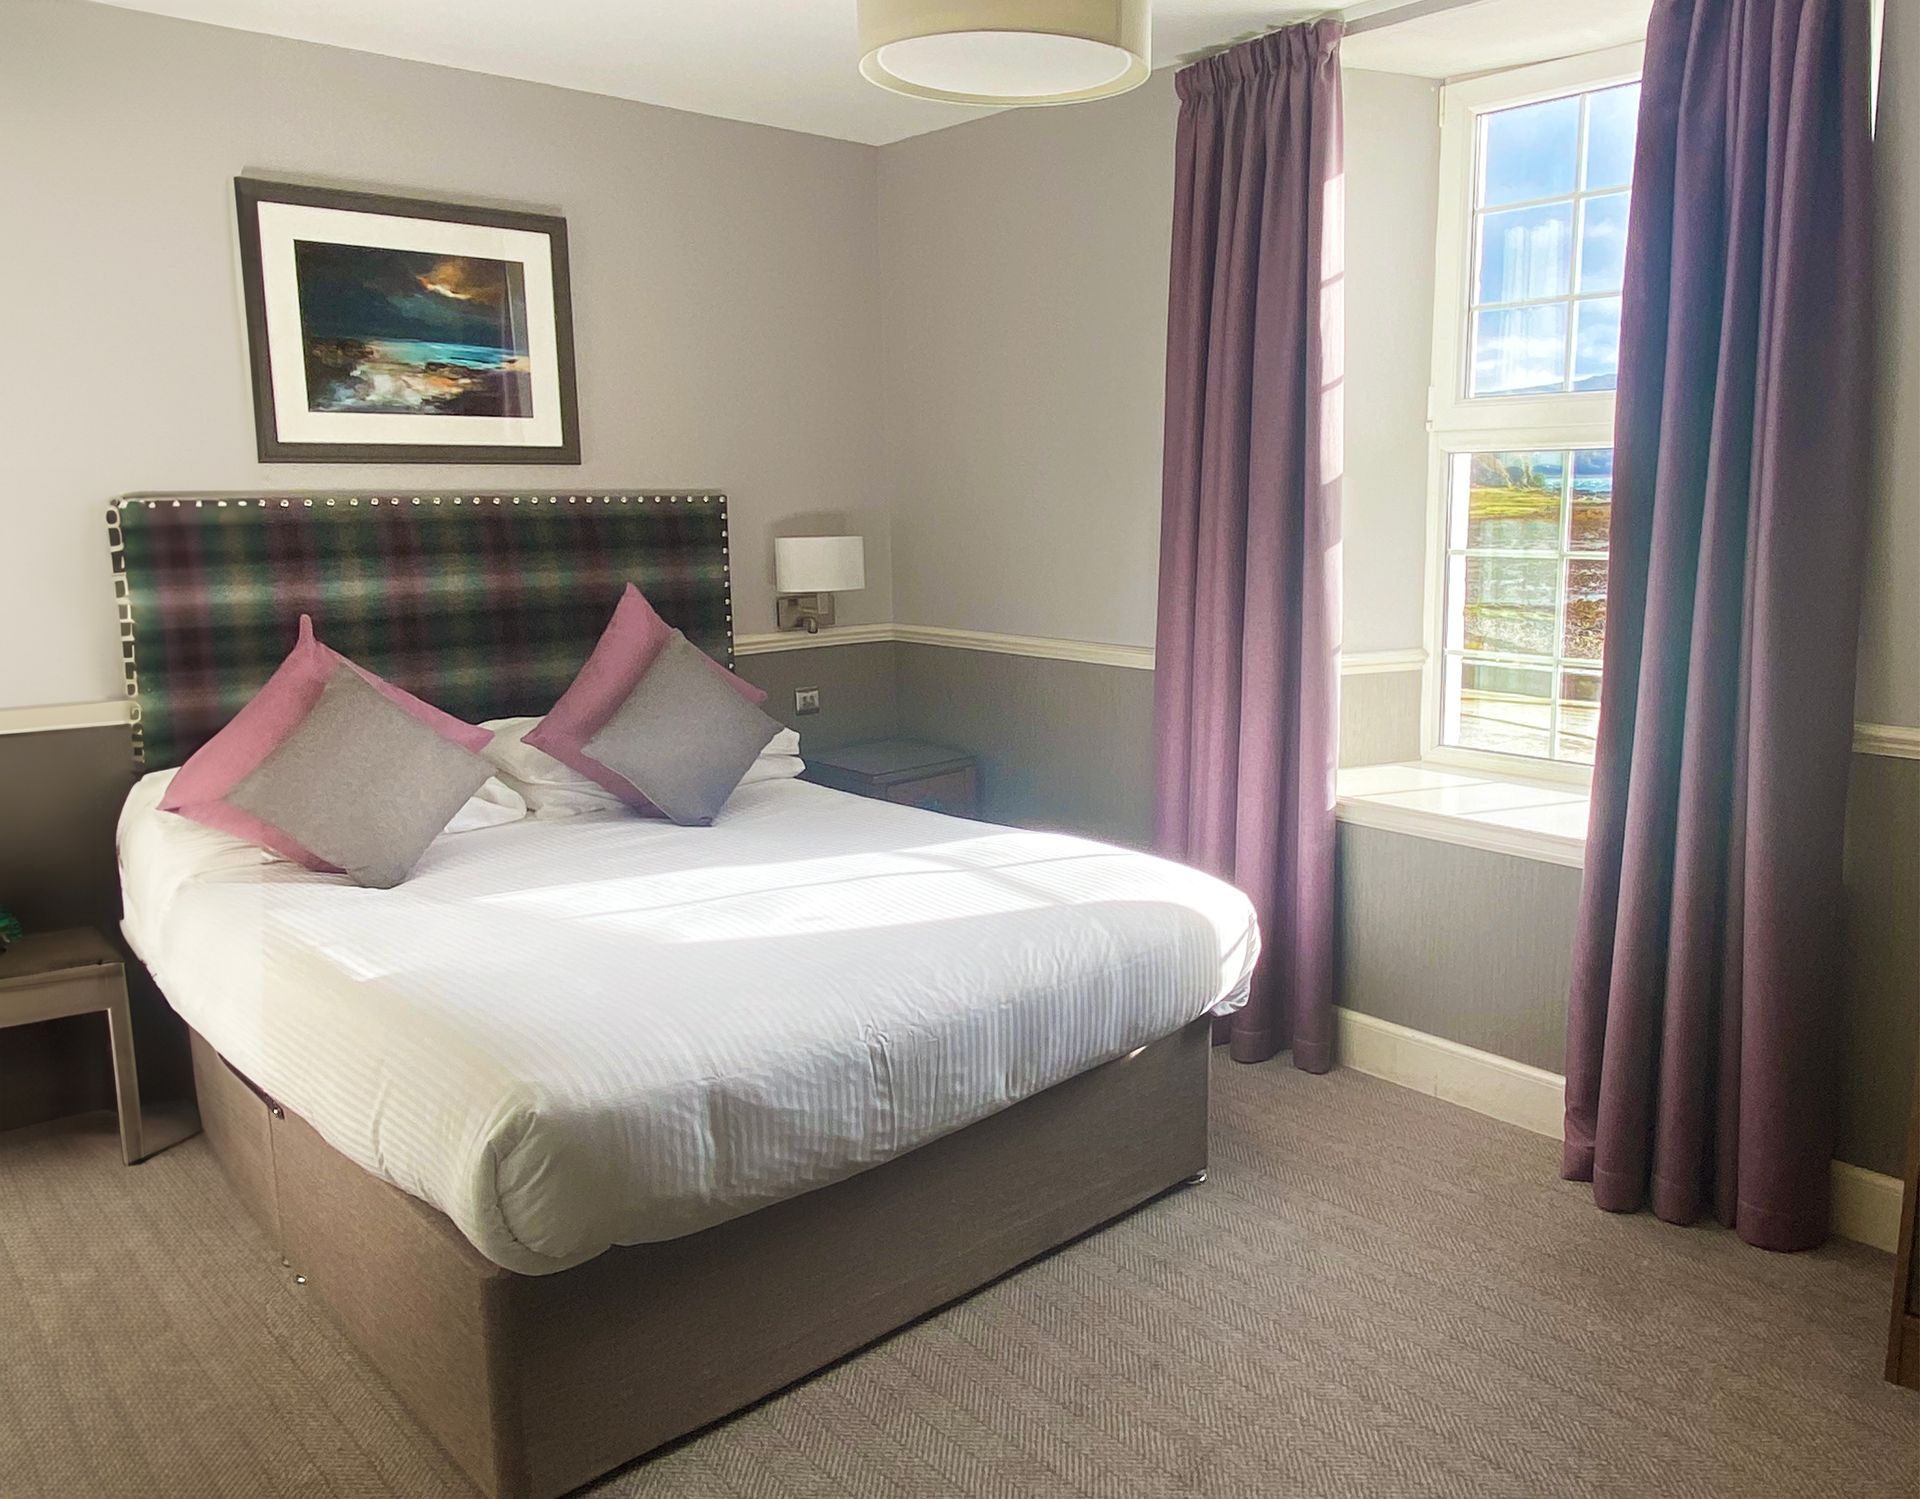 Double sea view room at Balmacara Hotel at the Highlands in Scotland